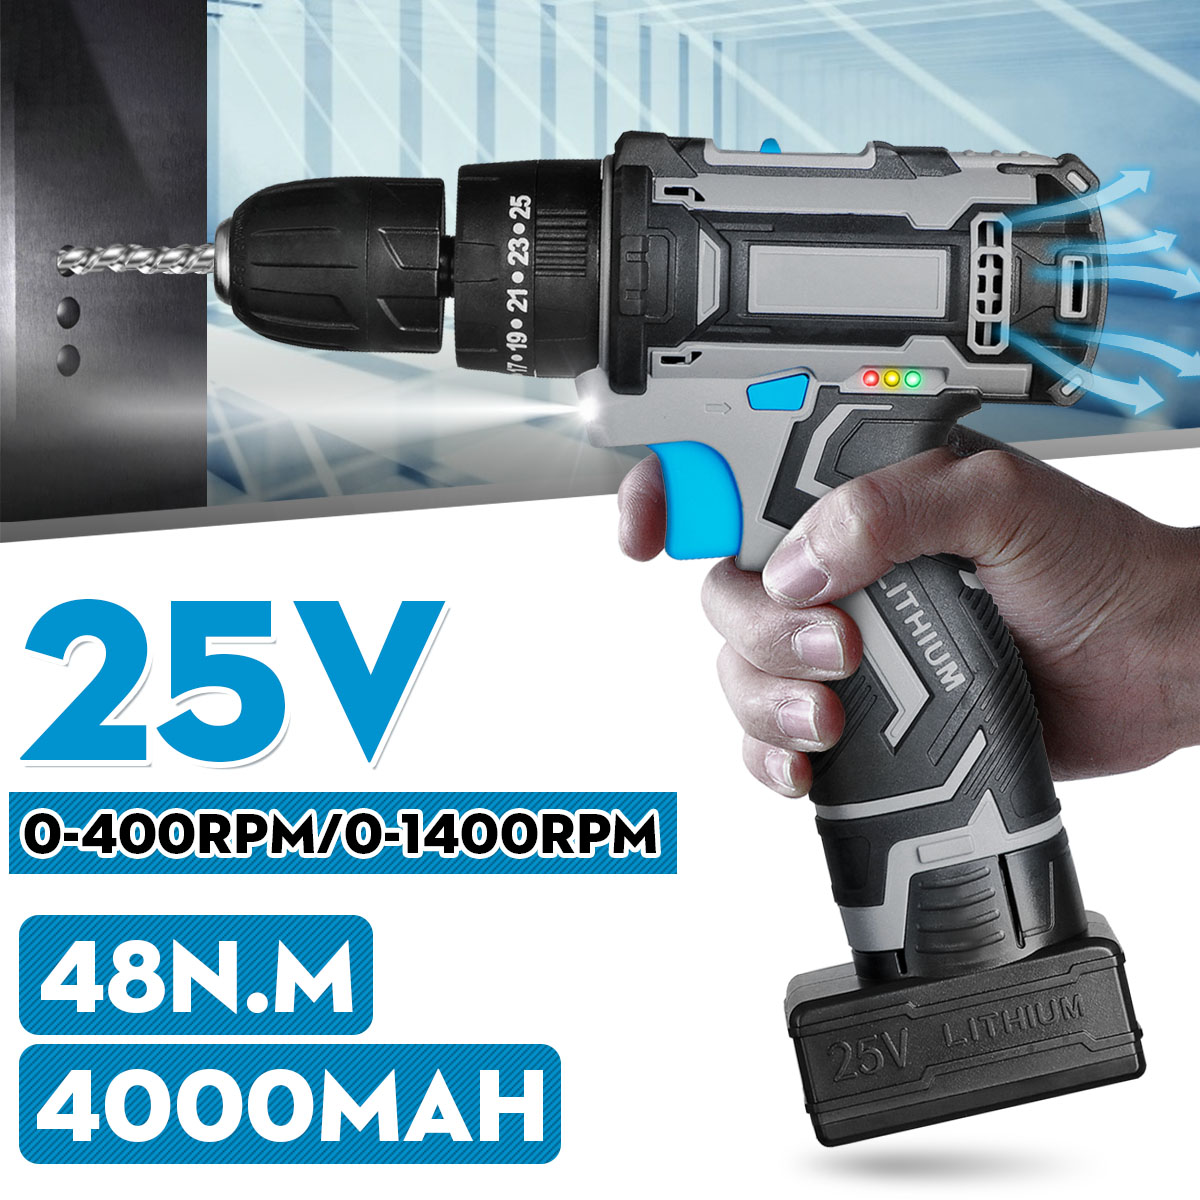 48Nm-25V-Electric-Drill-Cordless-Screwdriver-4000mAh-25-Gears-Household-Power-Tool-W-1pc-Battery-1792576-1